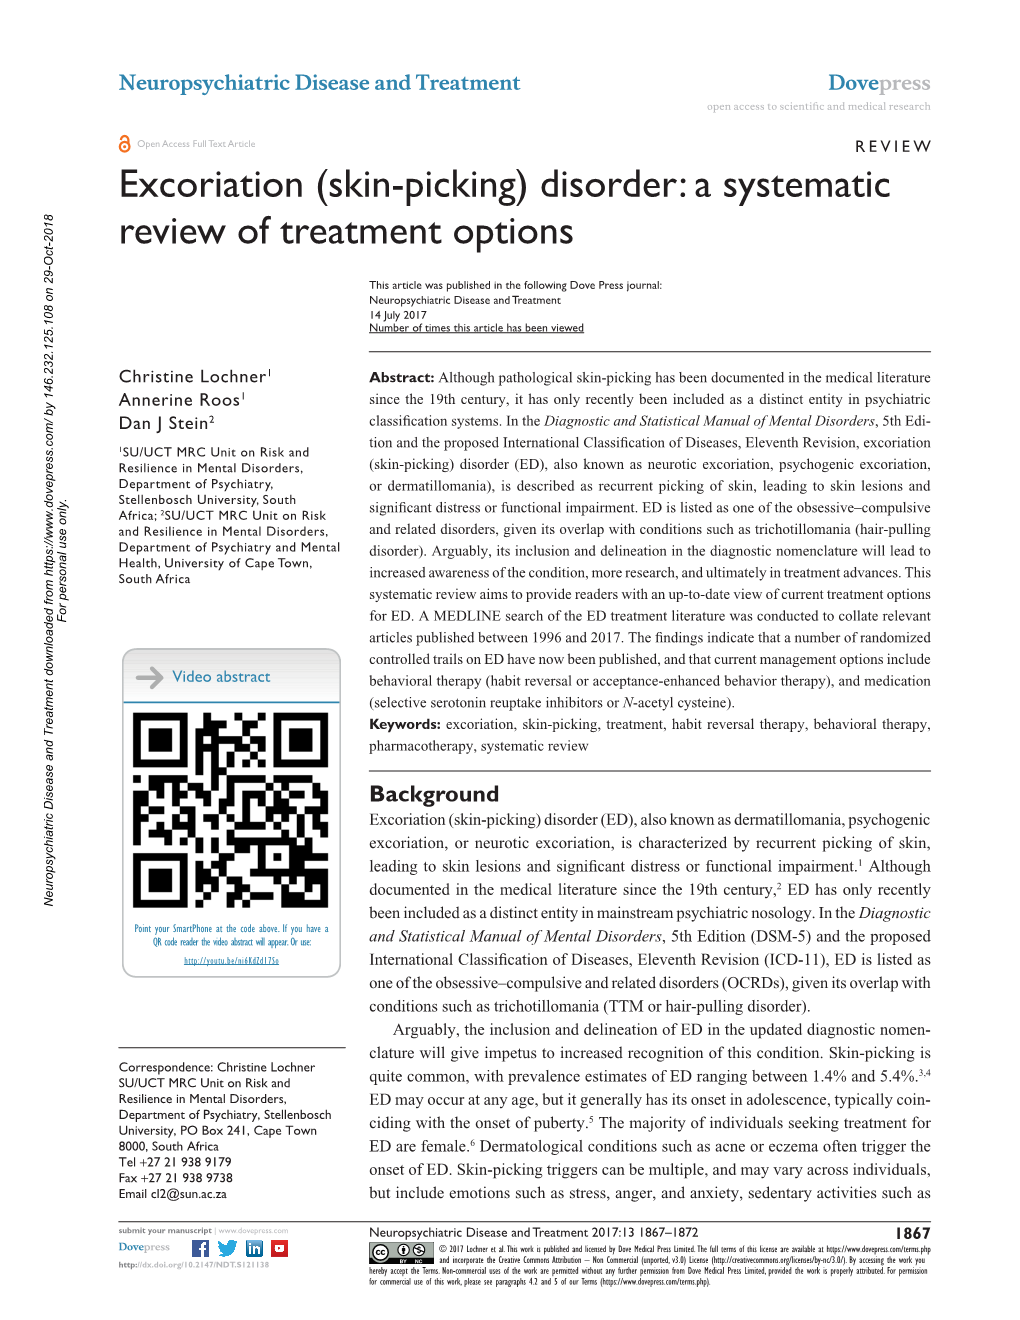 Excoriation (Skin-Picking) Disorder: a Systematic Review of Treatment Options